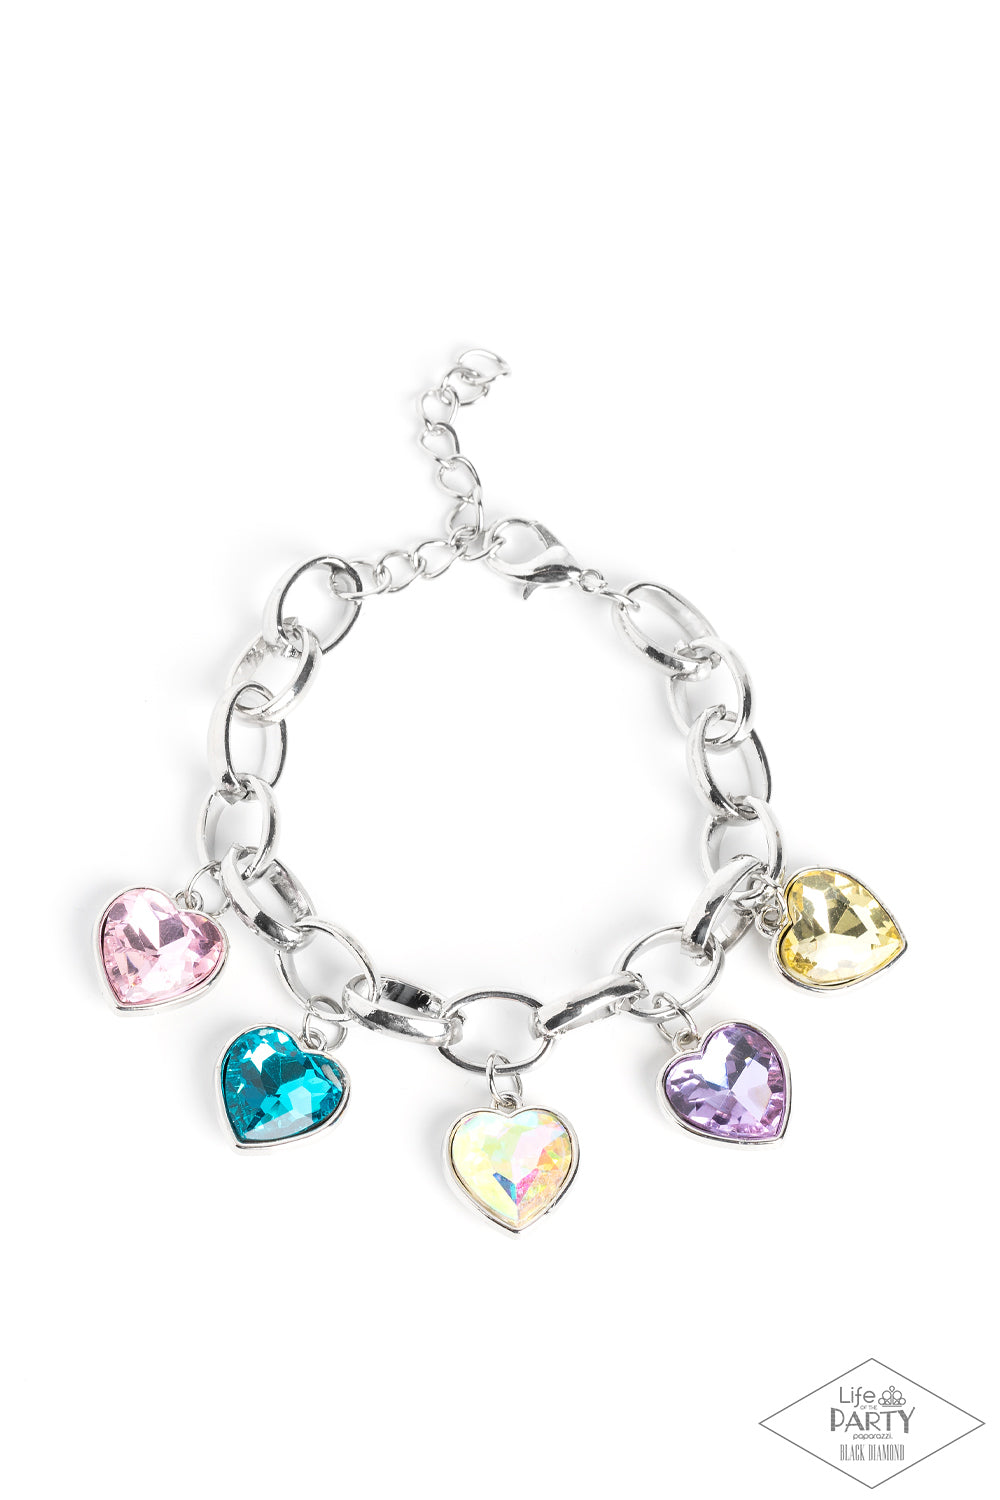 Paparazzi Accessories Candy Heart Charmer - Multi Multicolored heart-shaped gems are encased in sleek silver frames that swing from an oversized silver chain, creating a sparkly fringe around the wrist. Features an adjustable clasp closure. Due to its pri